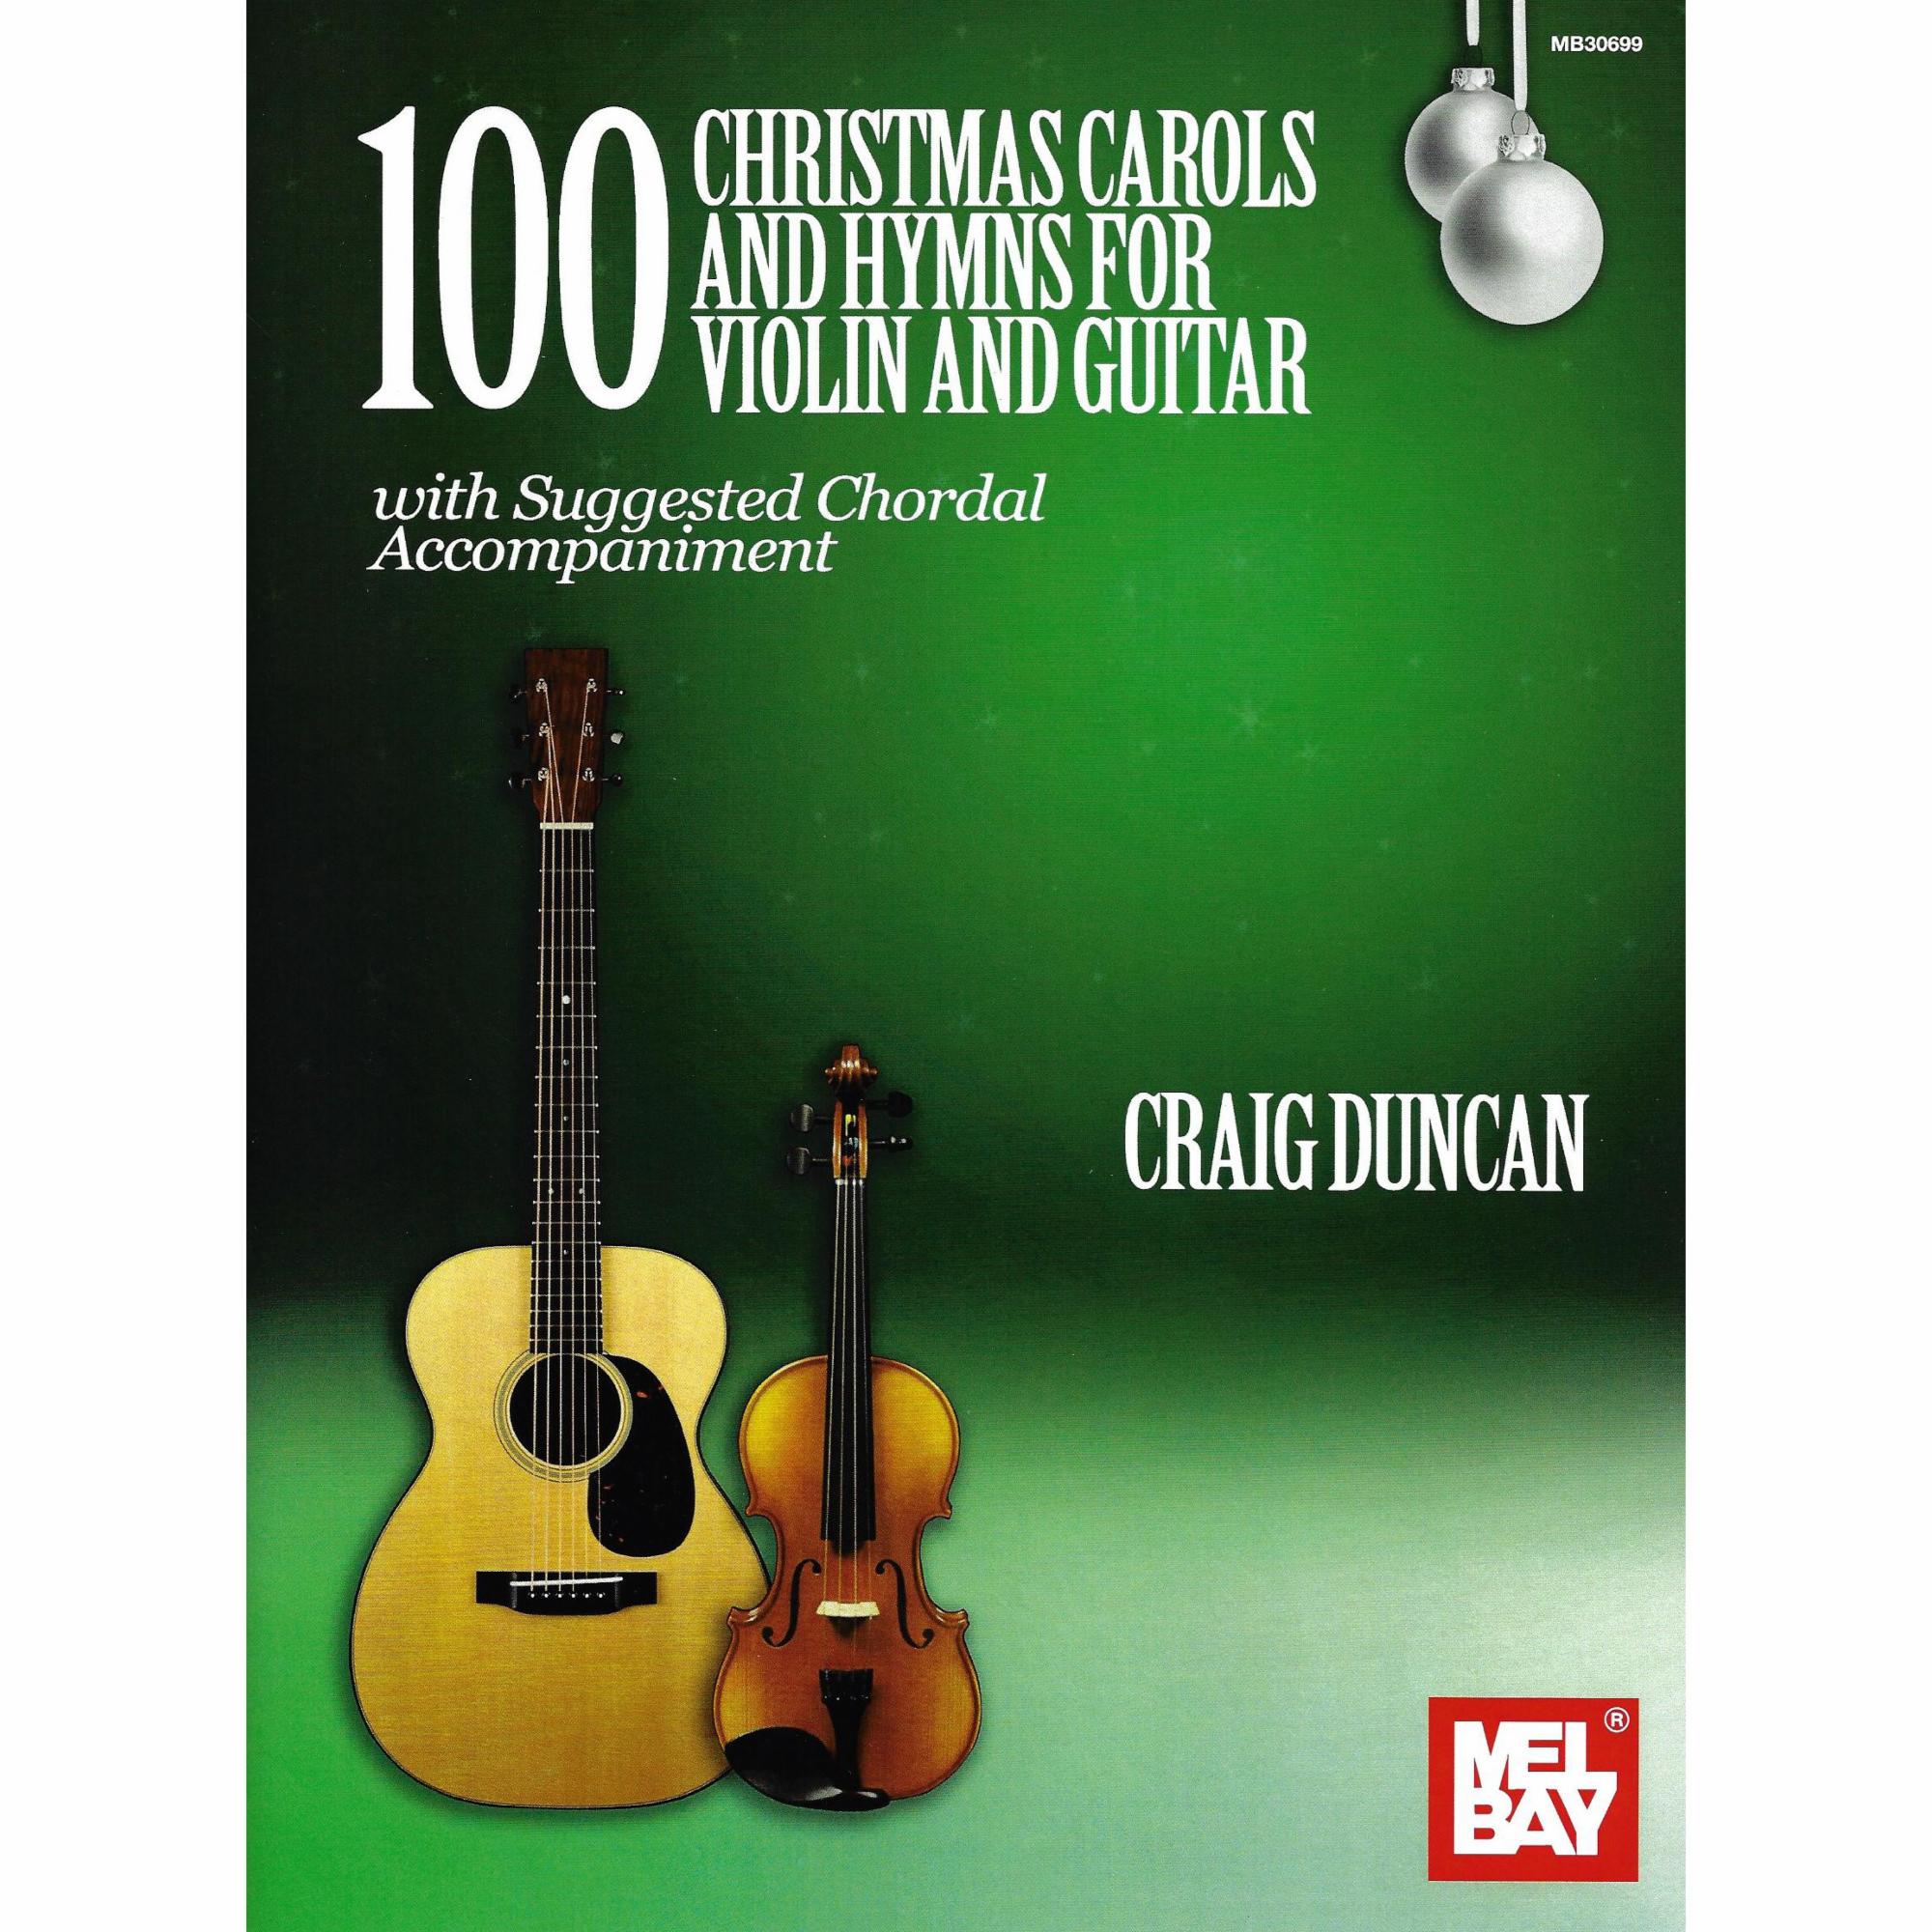 100 Christmas Carols and Hymns for Violin or Cello and Guitar